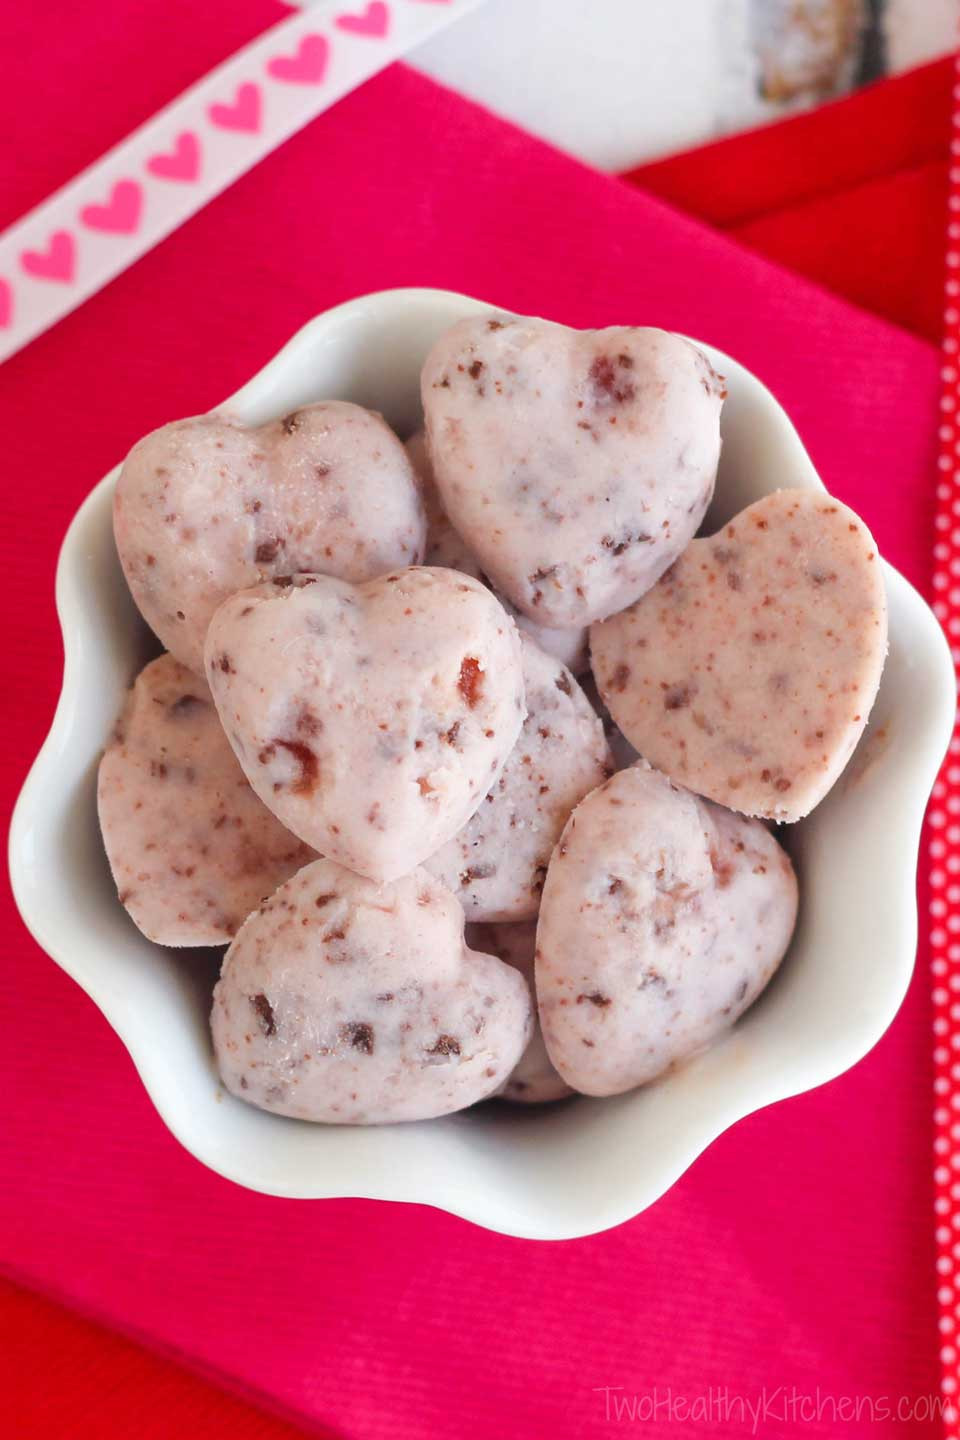 Healthy Valentine Snacks
 Easy Healthy Valentine s Day Treats and Snacks Two